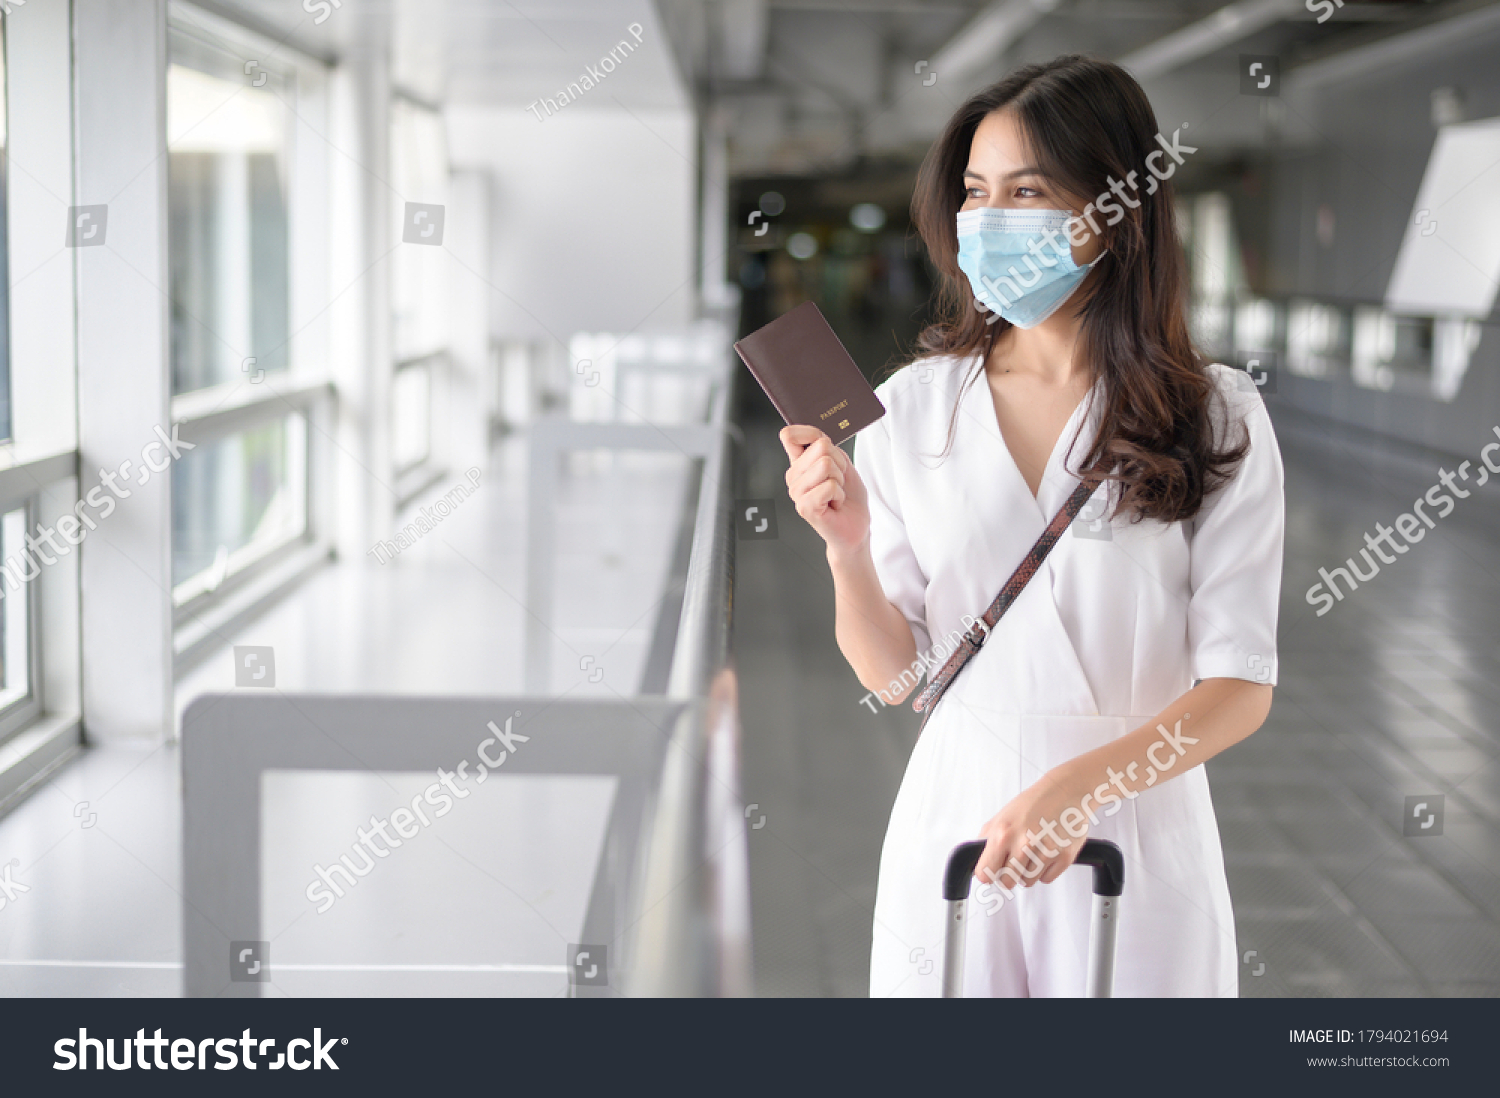 A traveller woman is wearing protective mask in International airport, travel under Covid-19 pandemic, safety travels, social distancing protocol, New normal travel concept . #1794021694